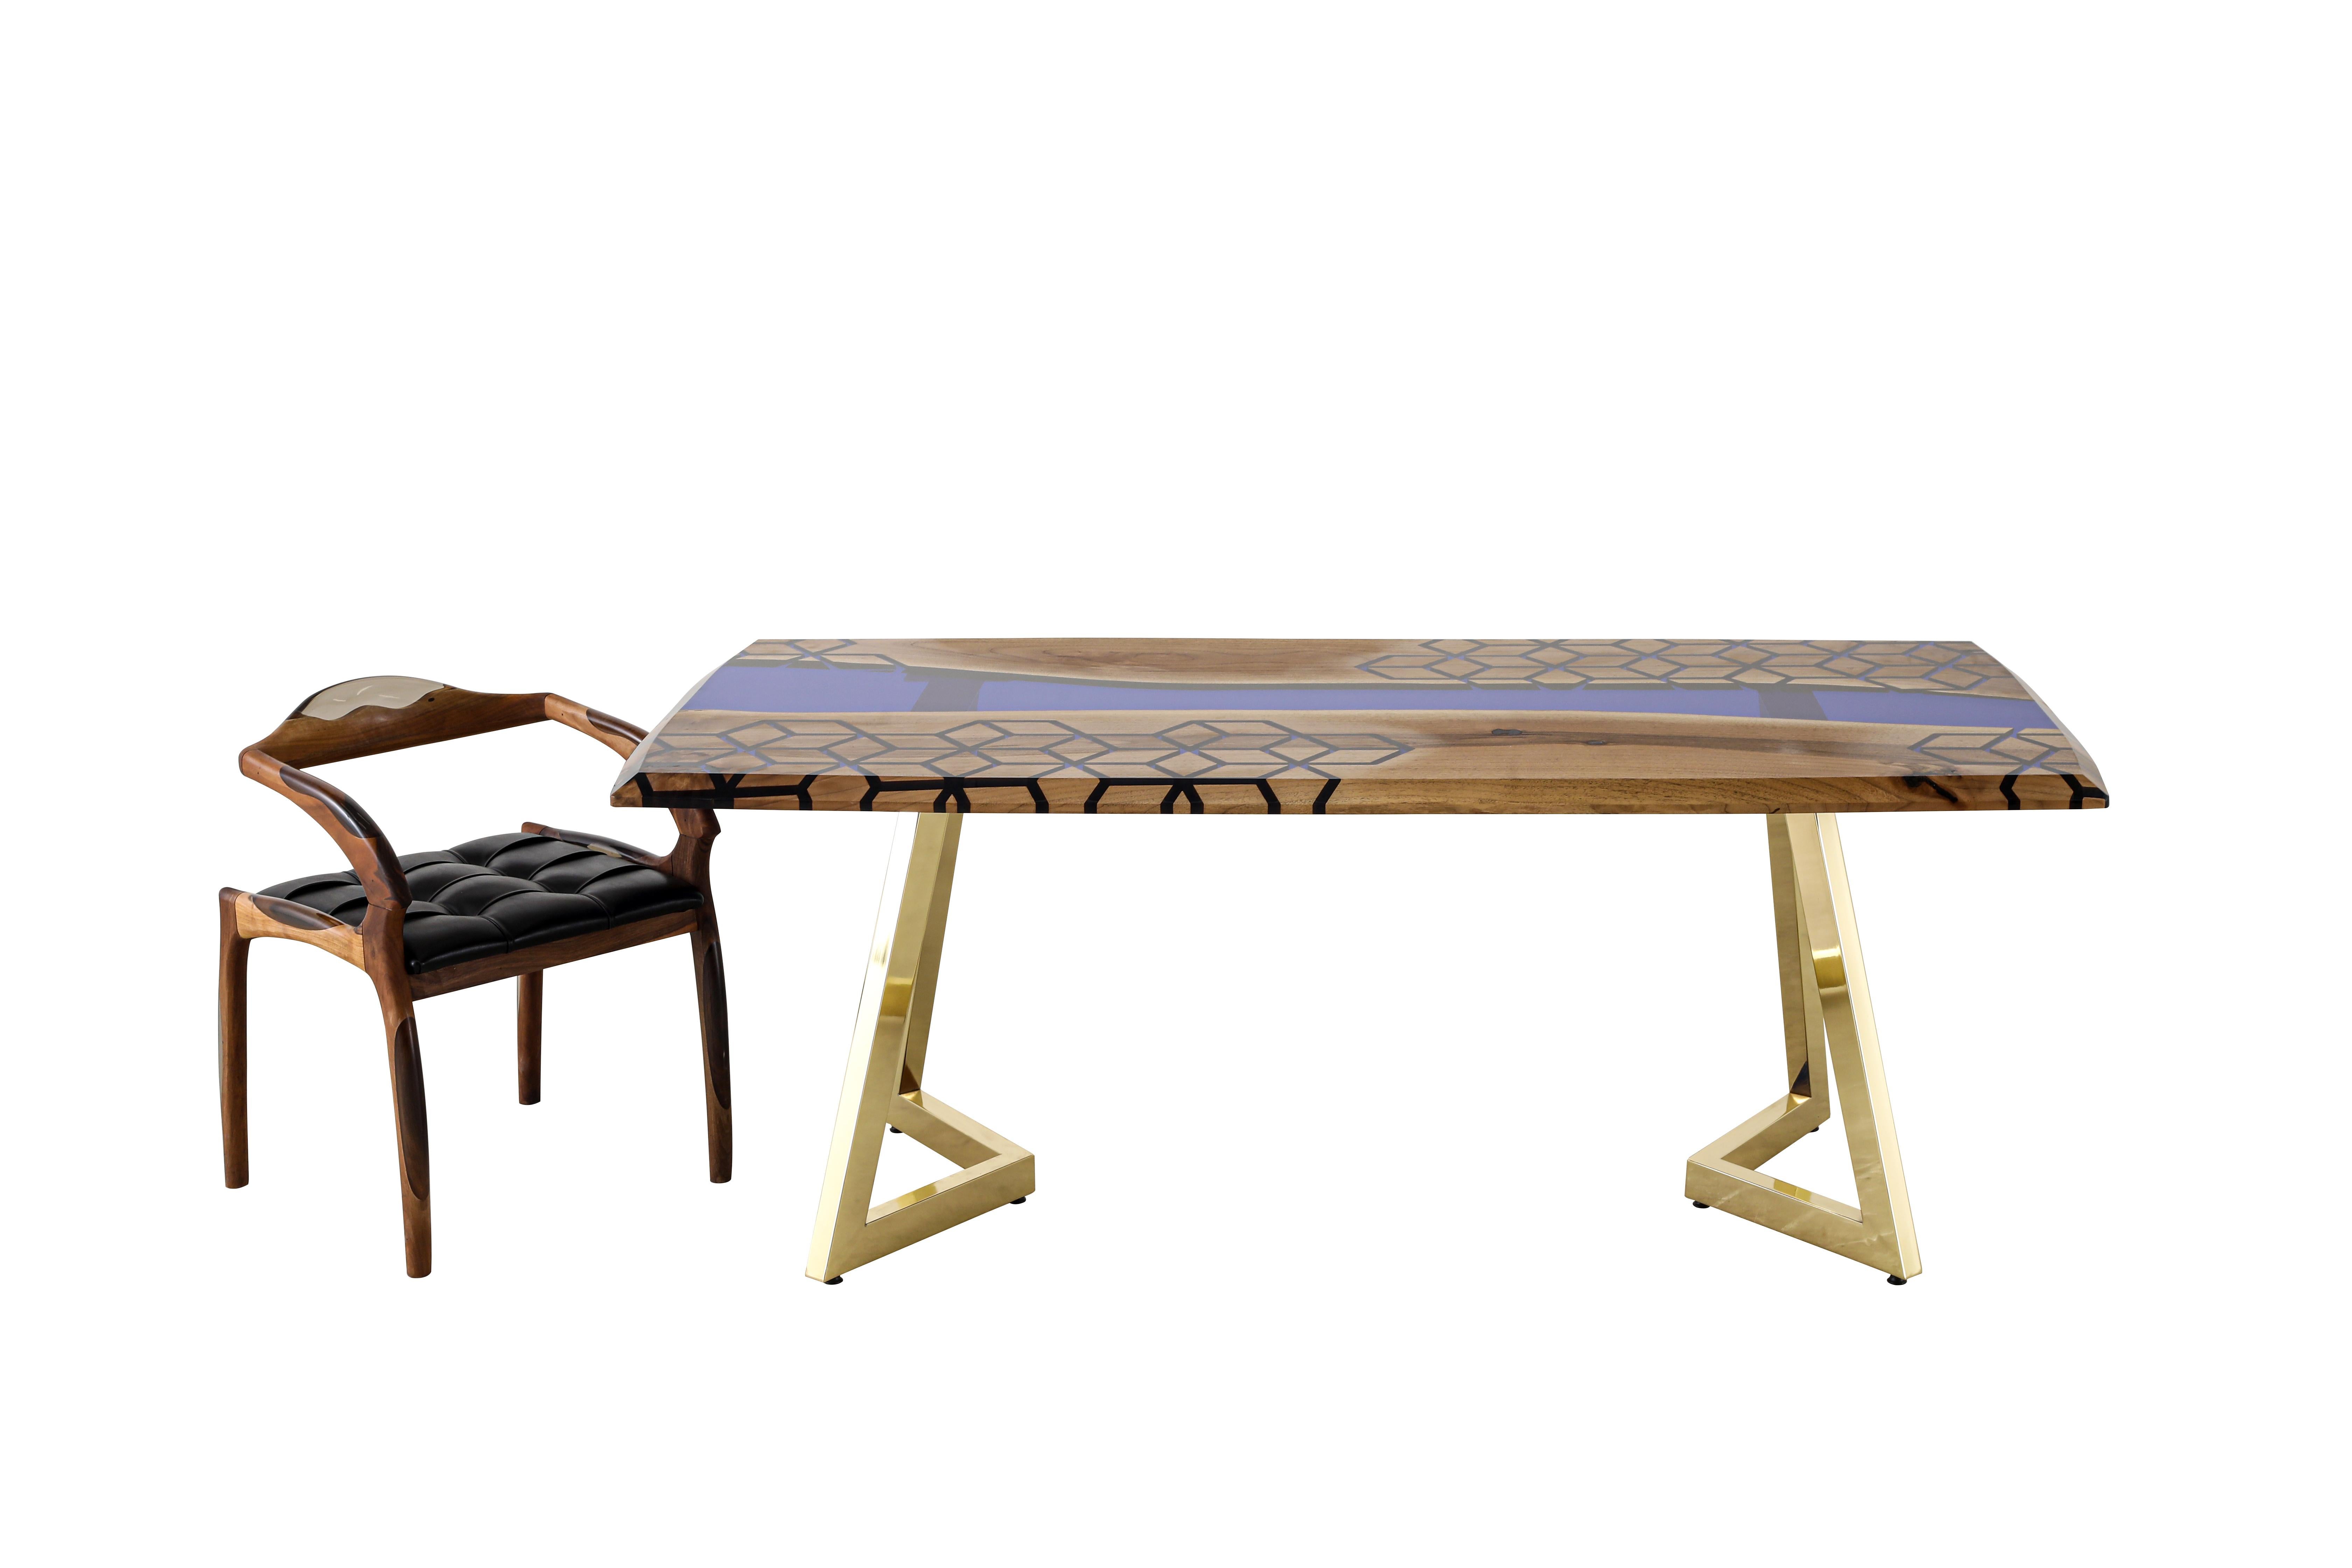 Turkish Deep Blue Epoxy Resin River Custom Wood Dining Table For Sale